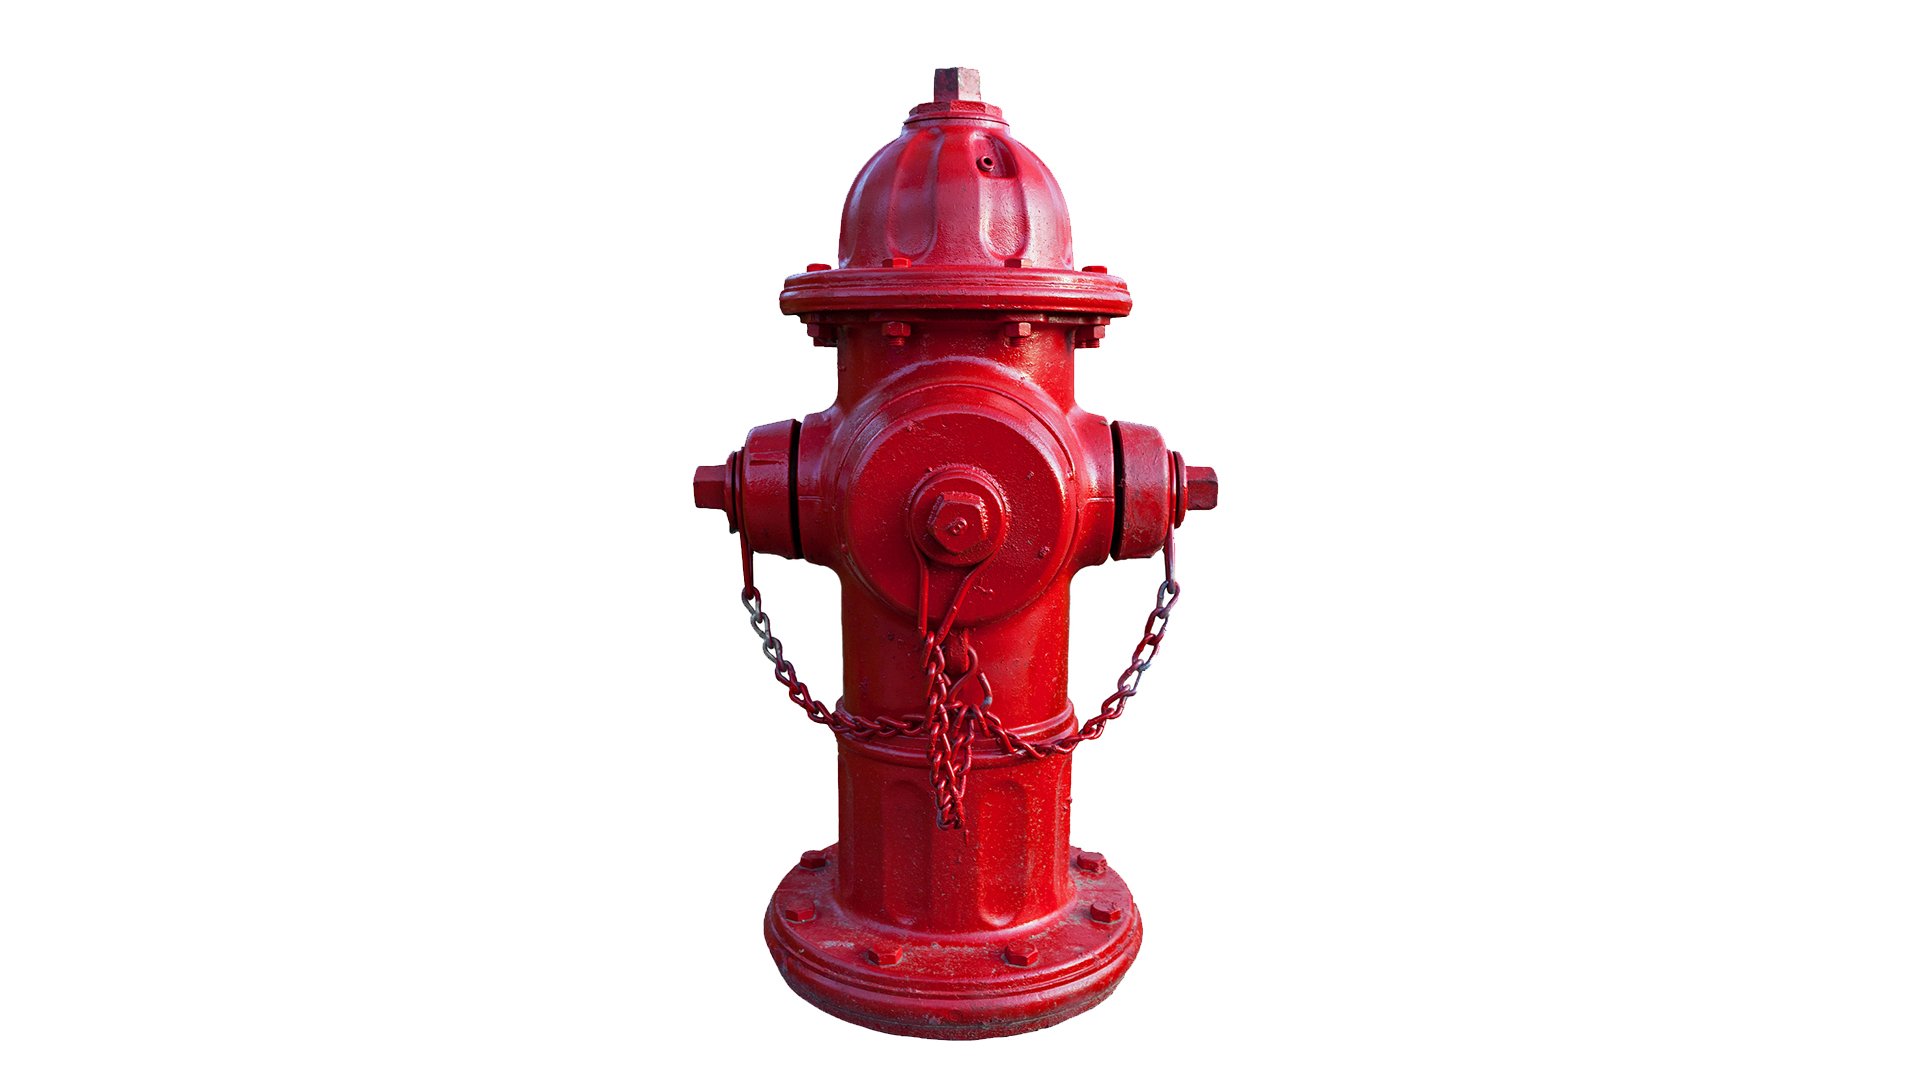 Fire hydrant 1